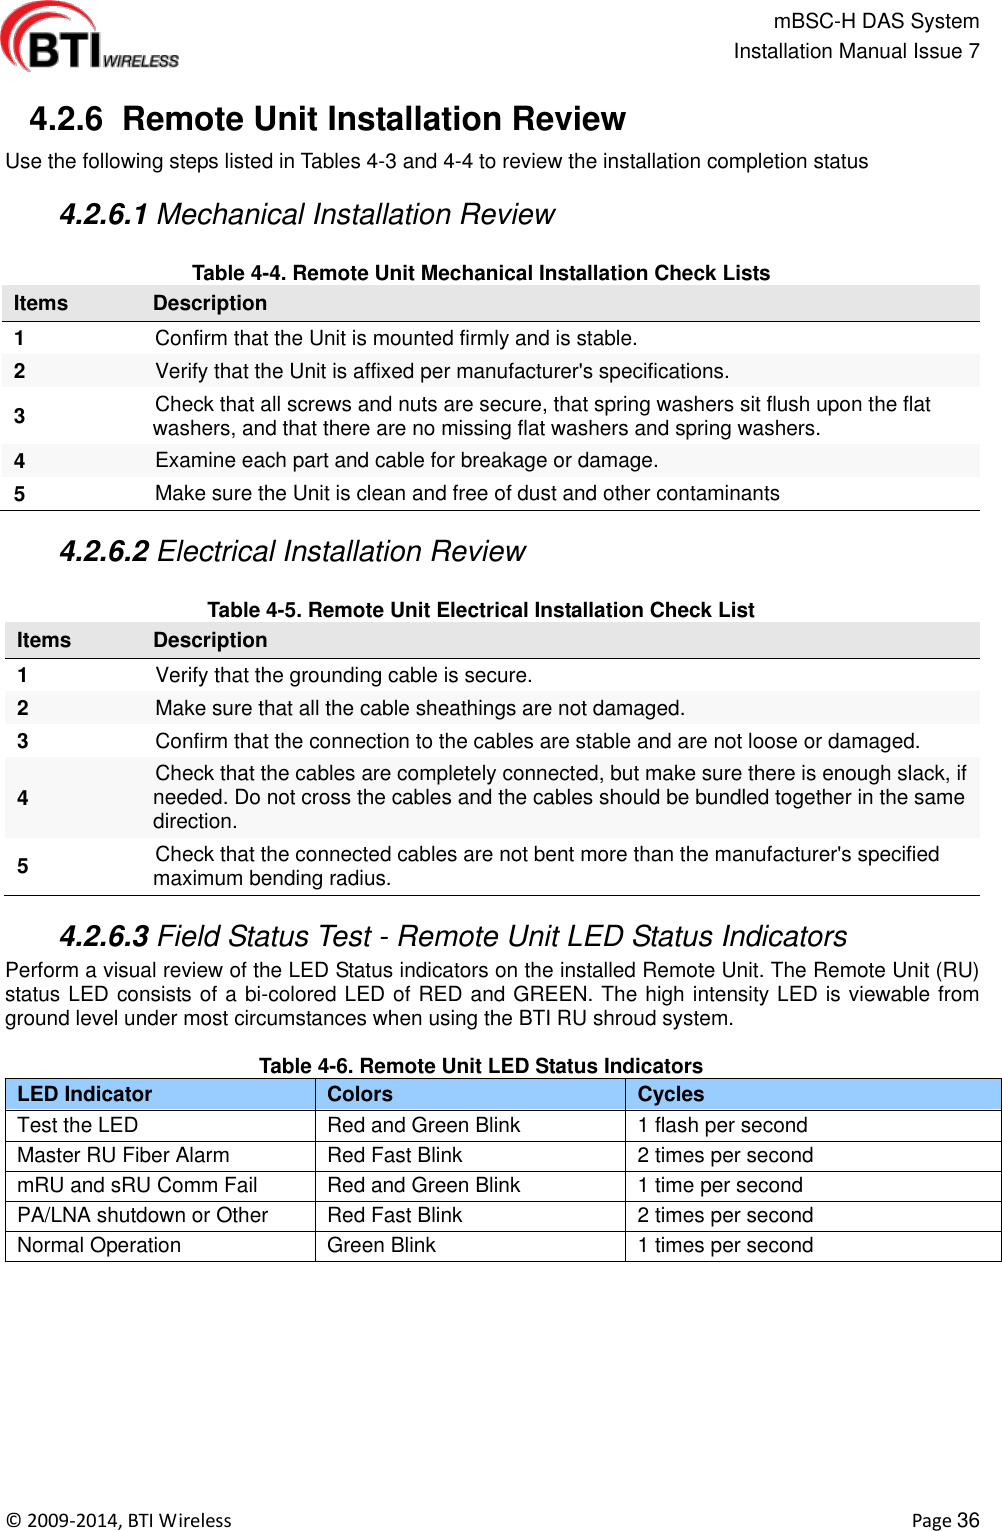                                                   mBSC-H DAS System   Installation Manual Issue 7  ©  2009-2014, BTI Wireless    Page 36   4.2.6  Remote Unit Installation Review   Use the following steps listed in Tables 4-3 and 4-4 to review the installation completion status   4.2.6.1 Mechanical Installation Review  Table 4-4. Remote Unit Mechanical Installation Check Lists Items Description 1 Confirm that the Unit is mounted firmly and is stable. 2 Verify that the Unit is affixed per manufacturer&apos;s specifications. 3 Check that all screws and nuts are secure, that spring washers sit flush upon the flat washers, and that there are no missing flat washers and spring washers. 4 Examine each part and cable for breakage or damage. 5 Make sure the Unit is clean and free of dust and other contaminants   4.2.6.2 Electrical Installation Review  Table 4-5. Remote Unit Electrical Installation Check List Items Description 1 Verify that the grounding cable is secure. 2 Make sure that all the cable sheathings are not damaged.   3 Confirm that the connection to the cables are stable and are not loose or damaged. 4 Check that the cables are completely connected, but make sure there is enough slack, if needed. Do not cross the cables and the cables should be bundled together in the same direction. 5 Check that the connected cables are not bent more than the manufacturer&apos;s specified maximum bending radius.   4.2.6.3 Field Status Test - Remote Unit LED Status Indicators Perform a visual review of the LED Status indicators on the installed Remote Unit. The Remote Unit (RU) status LED consists of a bi-colored LED of RED and GREEN. The high intensity LED is viewable from ground level under most circumstances when using the BTI RU shroud system.    Table 4-6. Remote Unit LED Status Indicators LED Indicator Colors Cycles Test the LED Red and Green Blink 1 flash per second Master RU Fiber Alarm Red Fast Blink 2 times per second mRU and sRU Comm Fail Red and Green Blink 1 time per second PA/LNA shutdown or Other Red Fast Blink 2 times per second Normal Operation Green Blink 1 times per second  